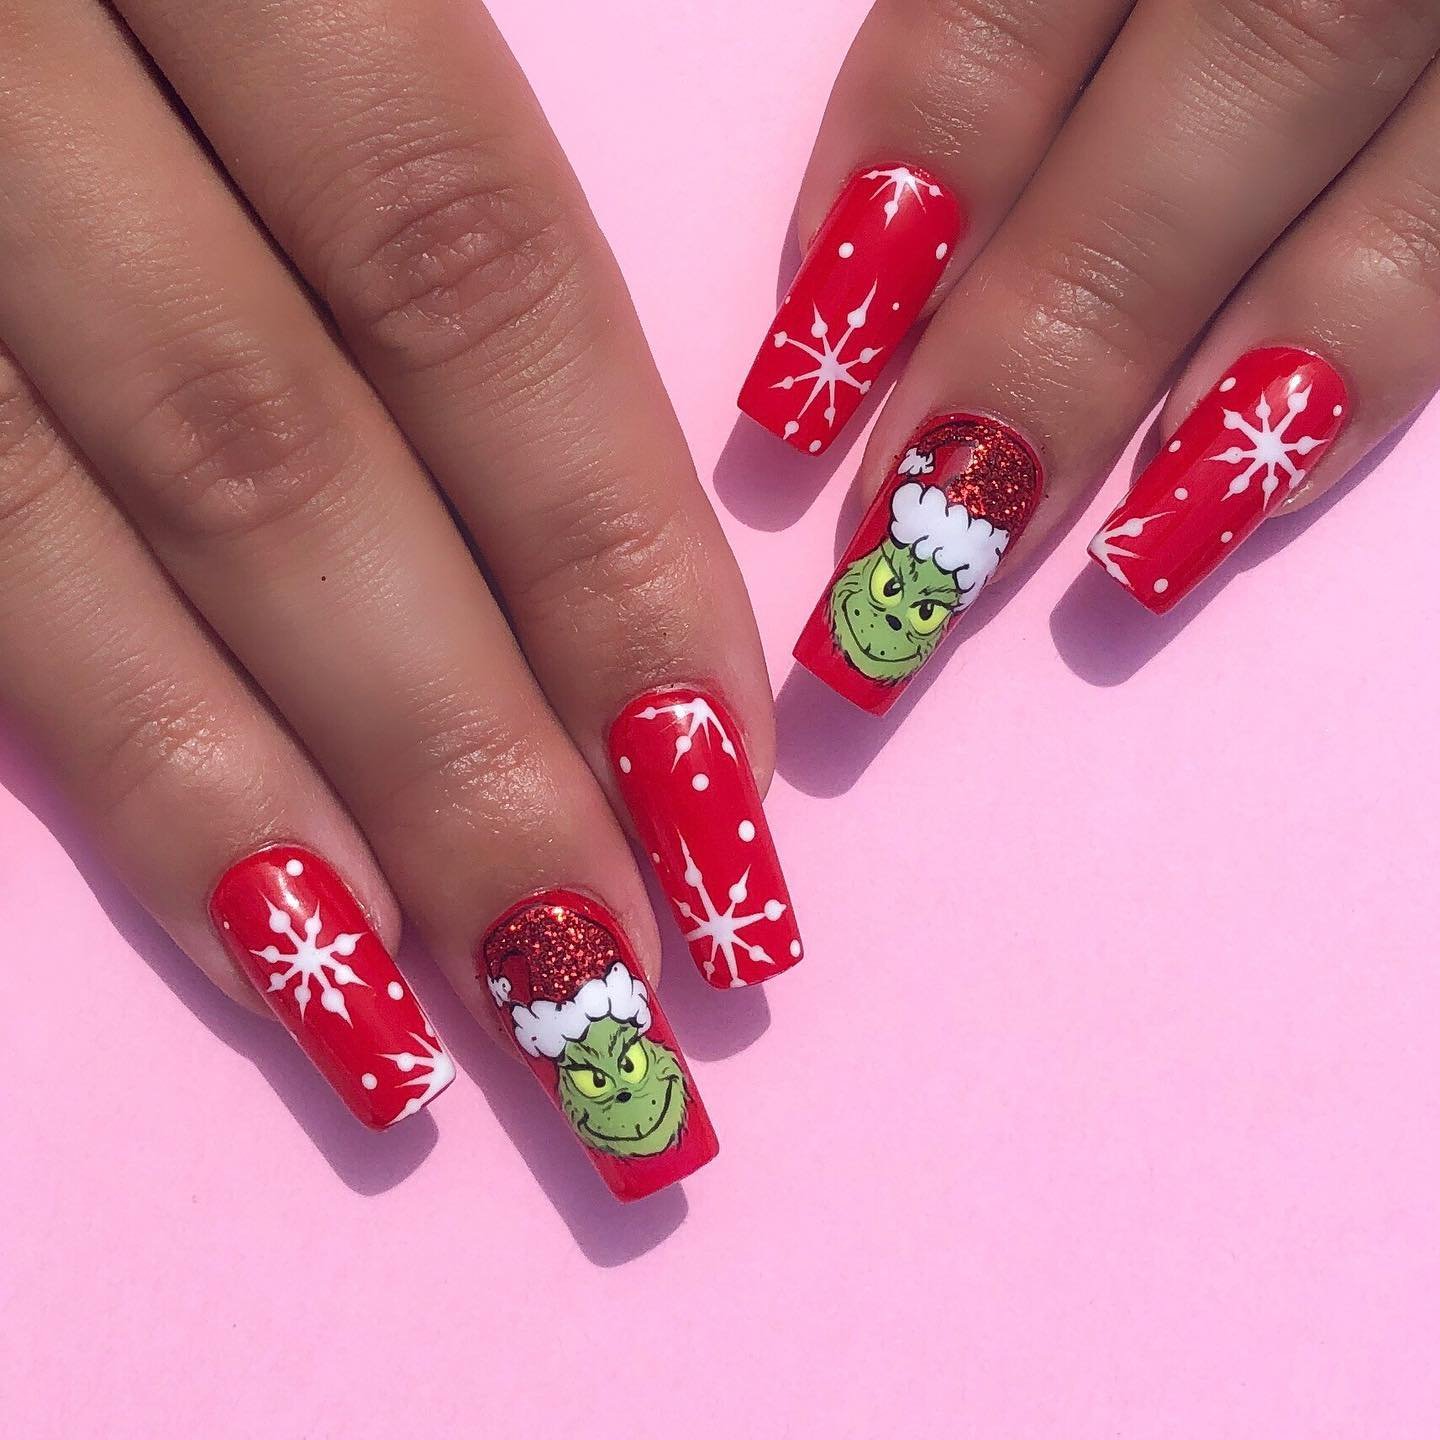 19 - Picture of Christmas Nails